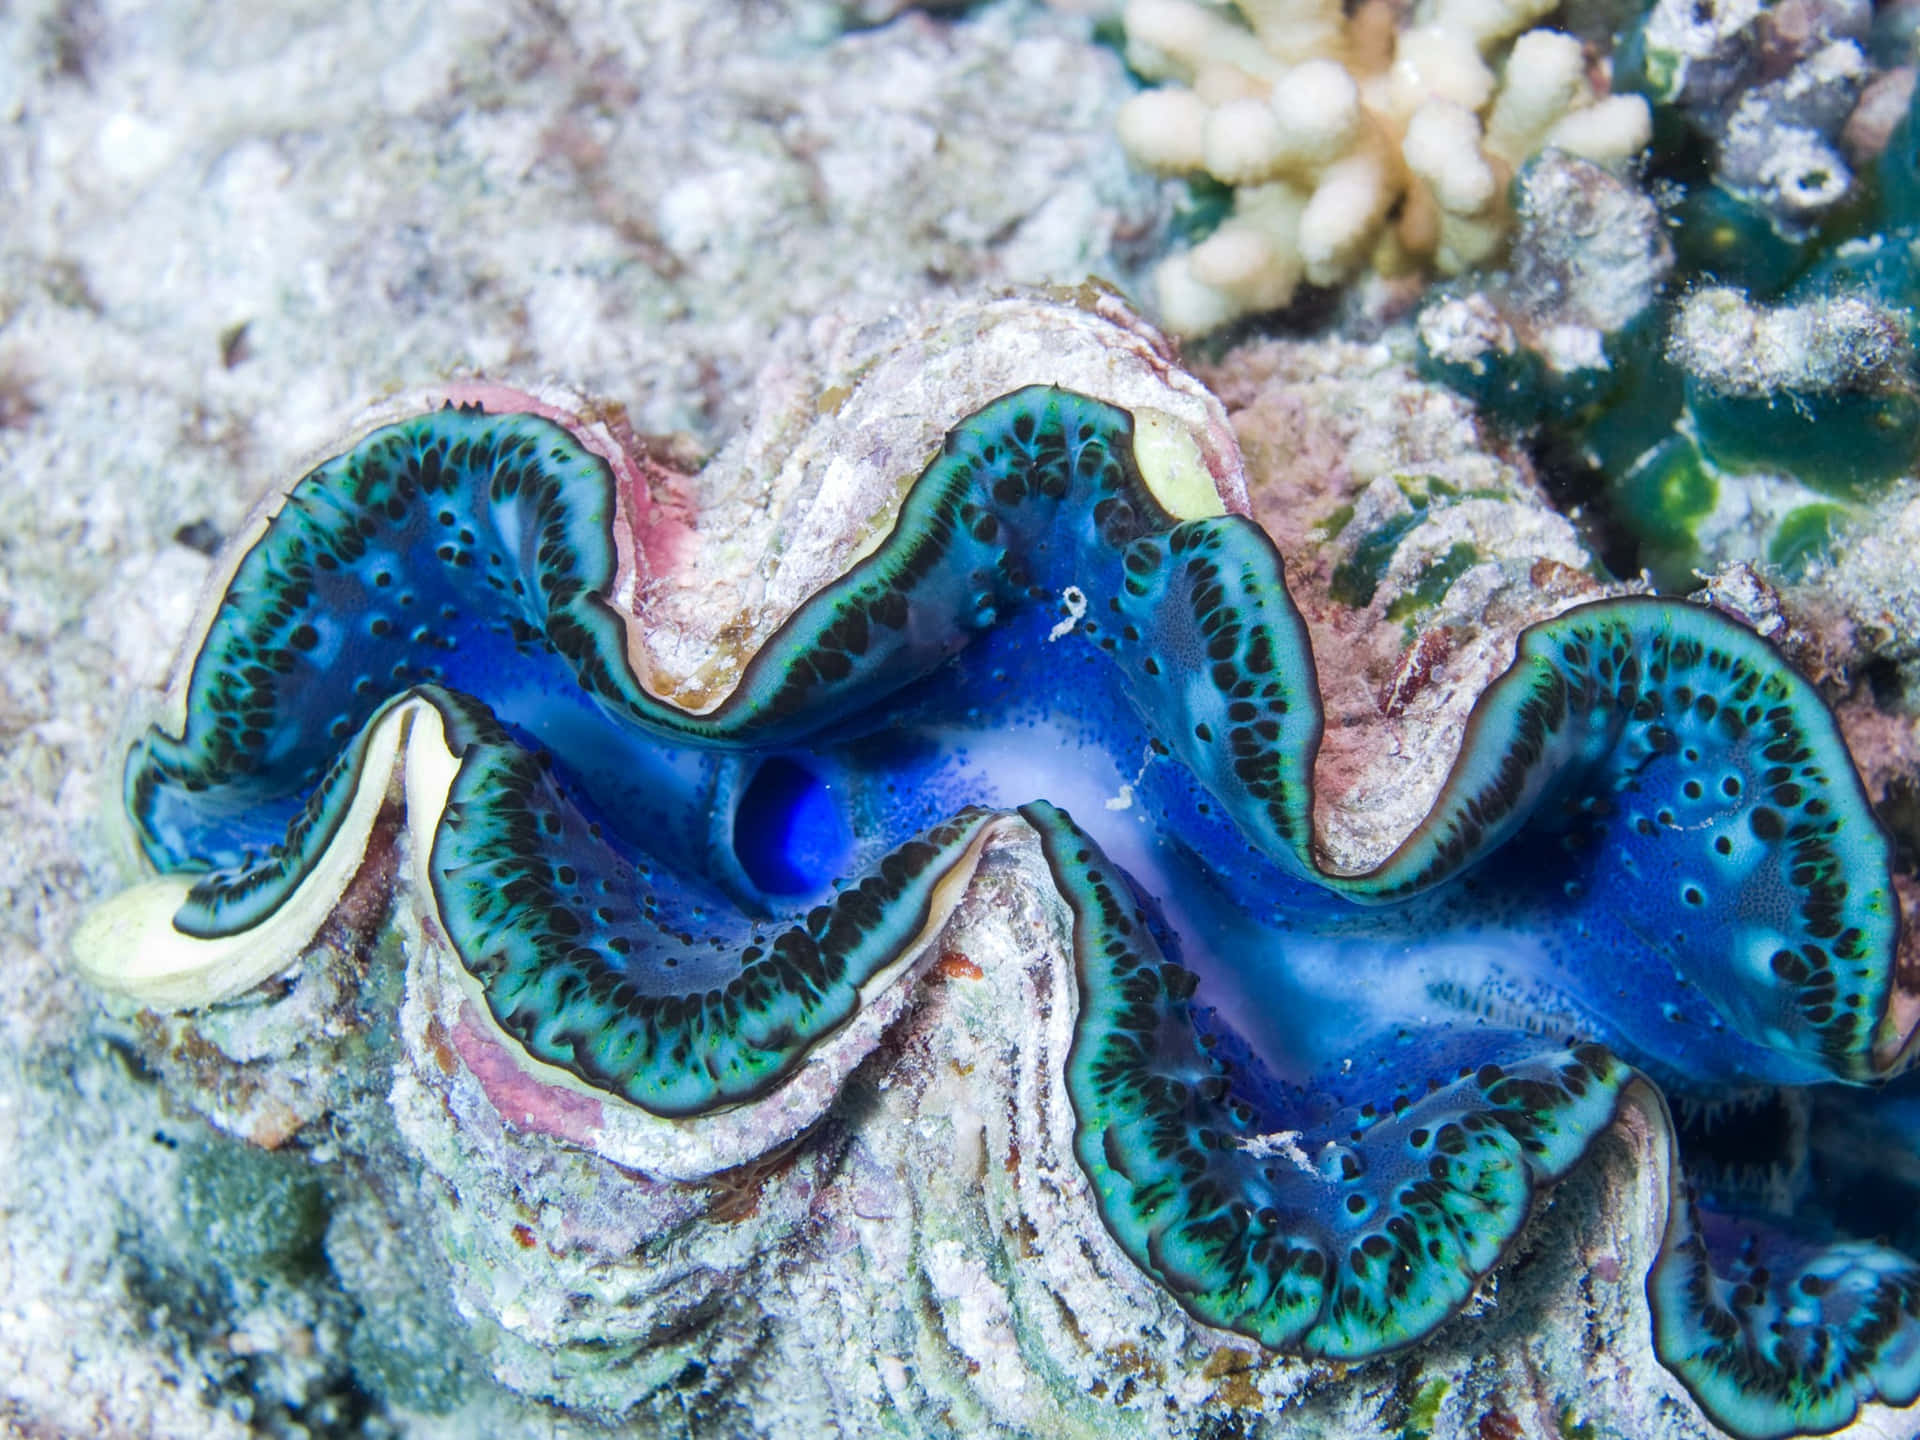 Stunning Picture Of A Giant Clam In Its Natural Underwater Habitat Wallpaper